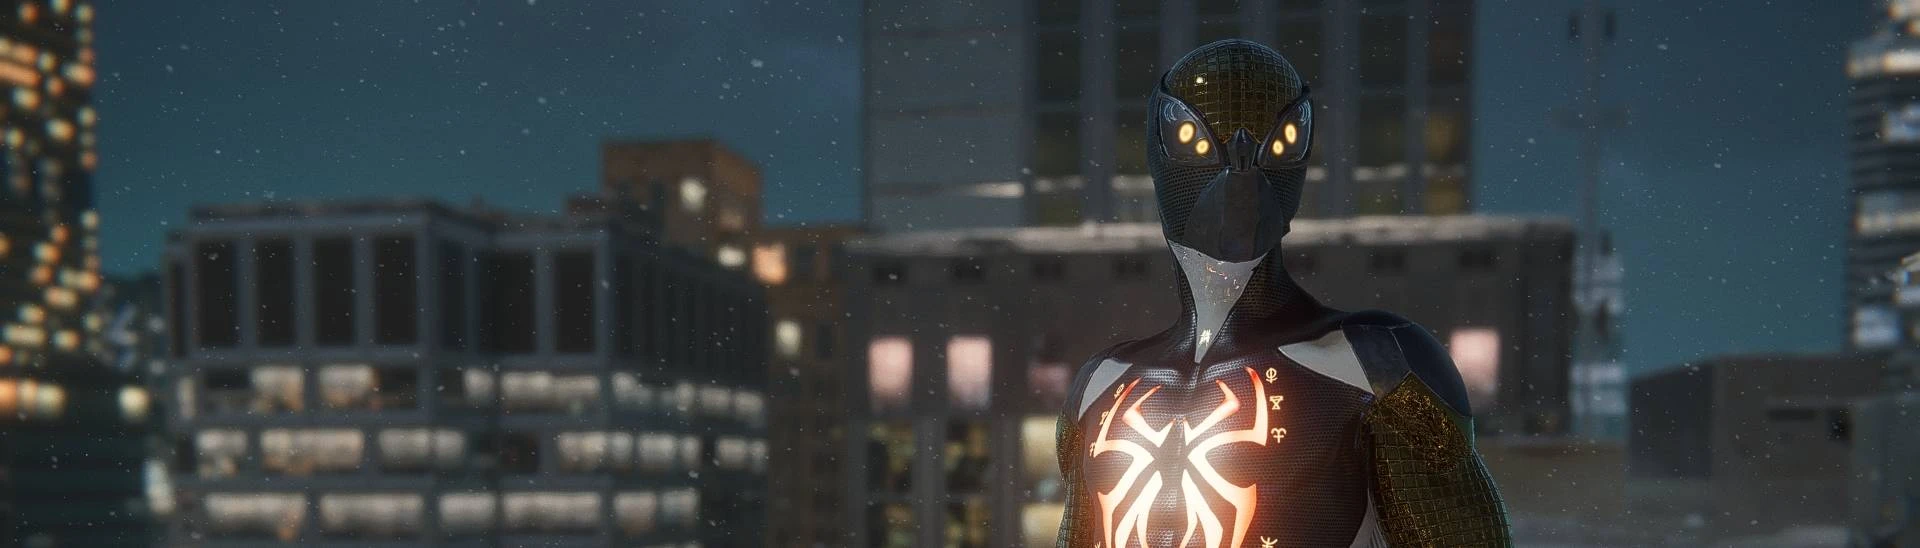 Midnight Suns Symbiote Suit (MM) - Marvel's Spider-Man: Miles Morales Mods